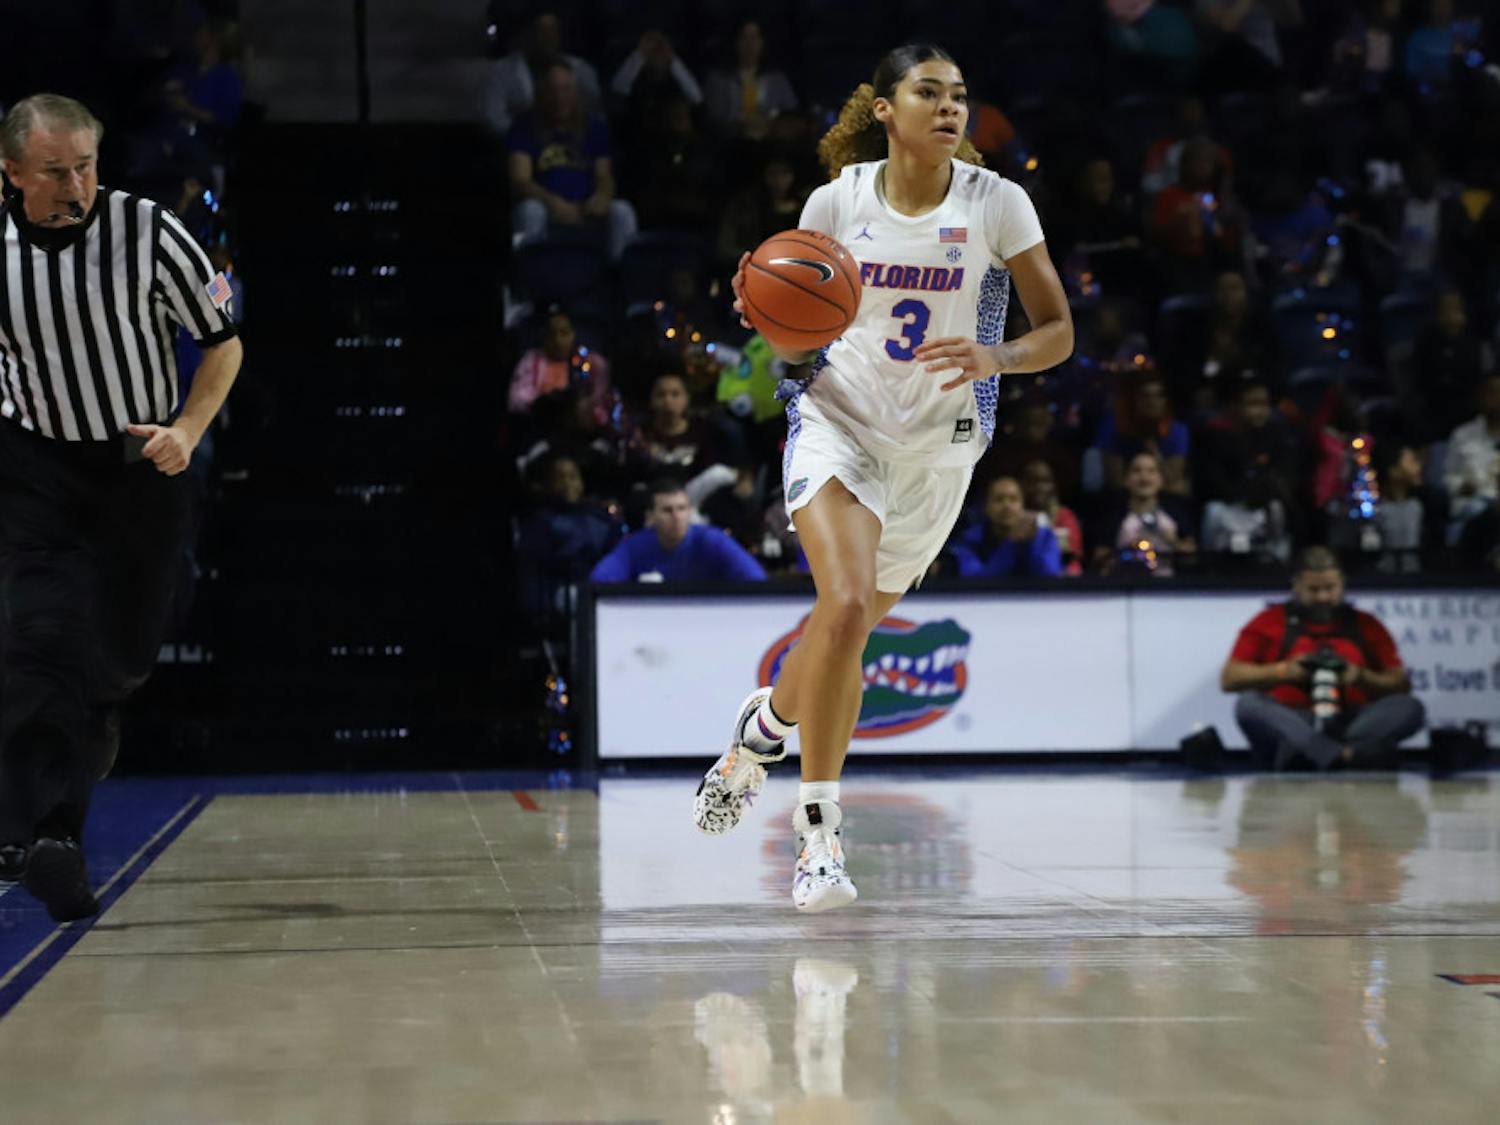 Florida guard Lavender Briggs led the team in scoring against Wake Forest with 23 points.